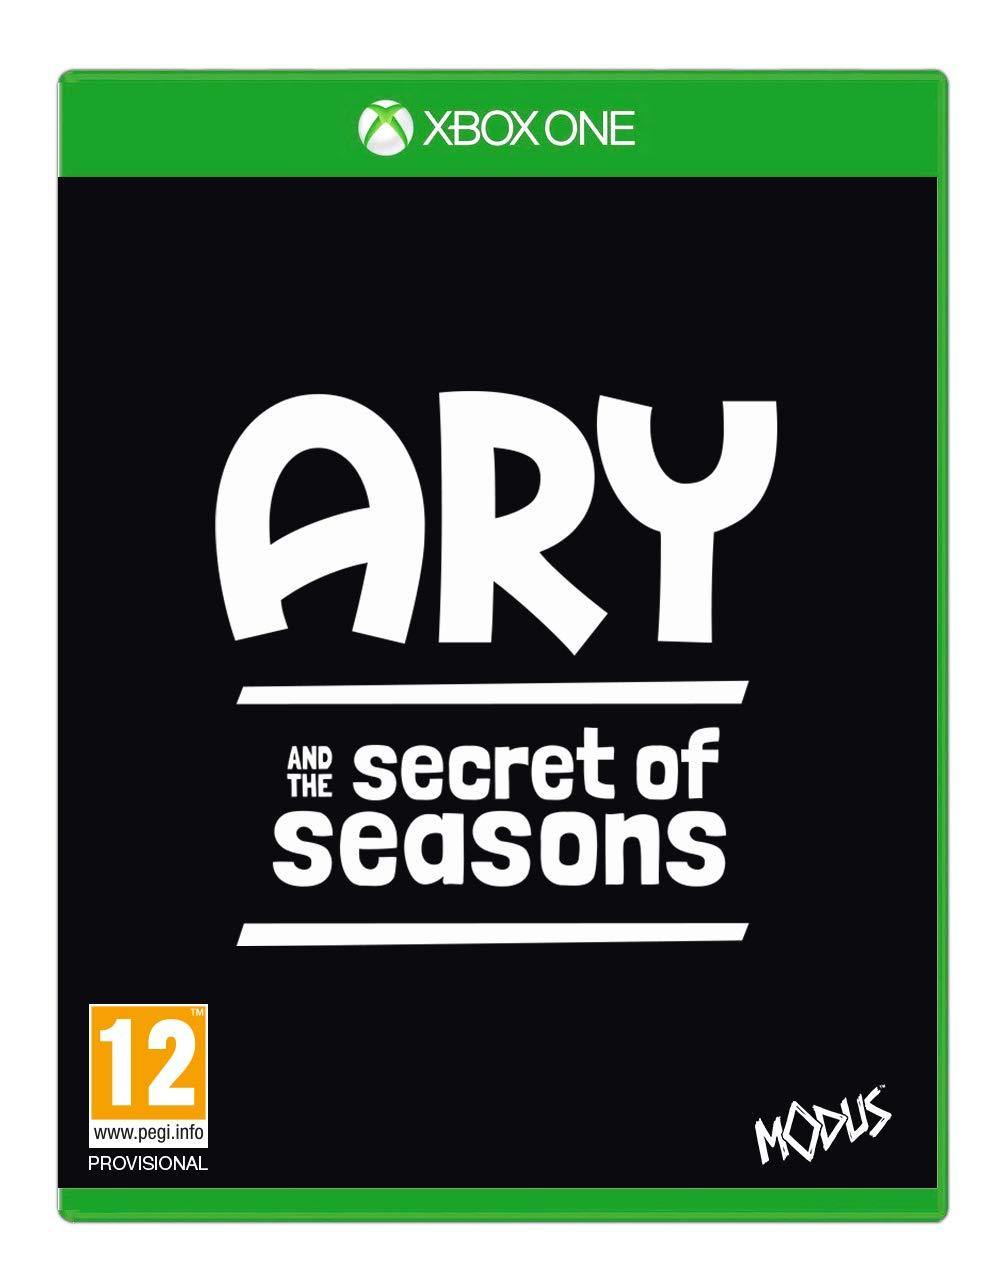 Ary and the Secret of Seasons (Xbox One) - Offer Games